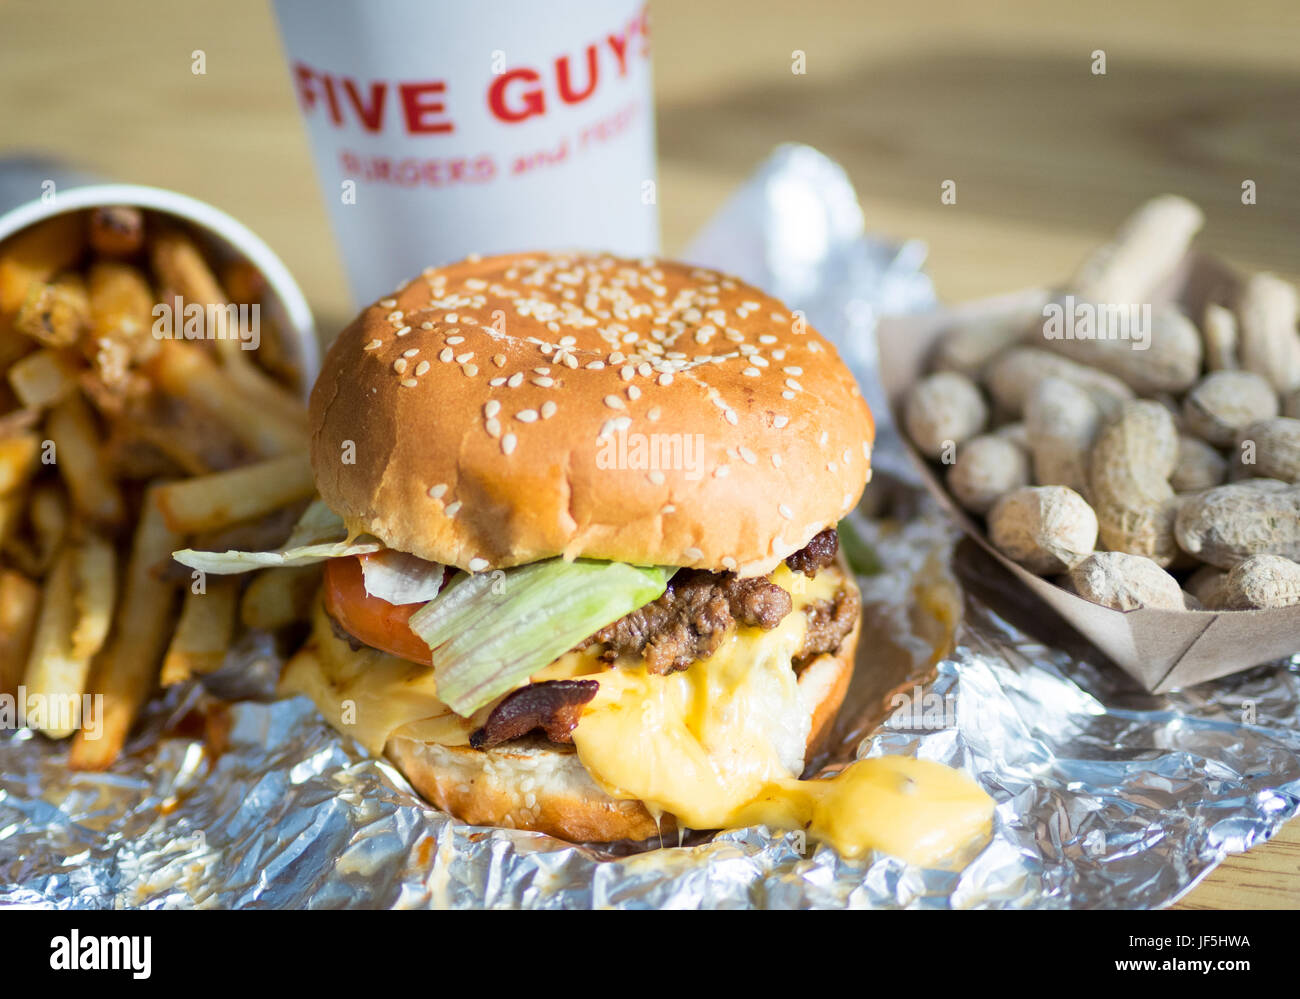 A bacon cheeseburger, French fries, and peanuts from Five Guys Burgers and Fries, an American fast casual restaurant chain. Stock Photo